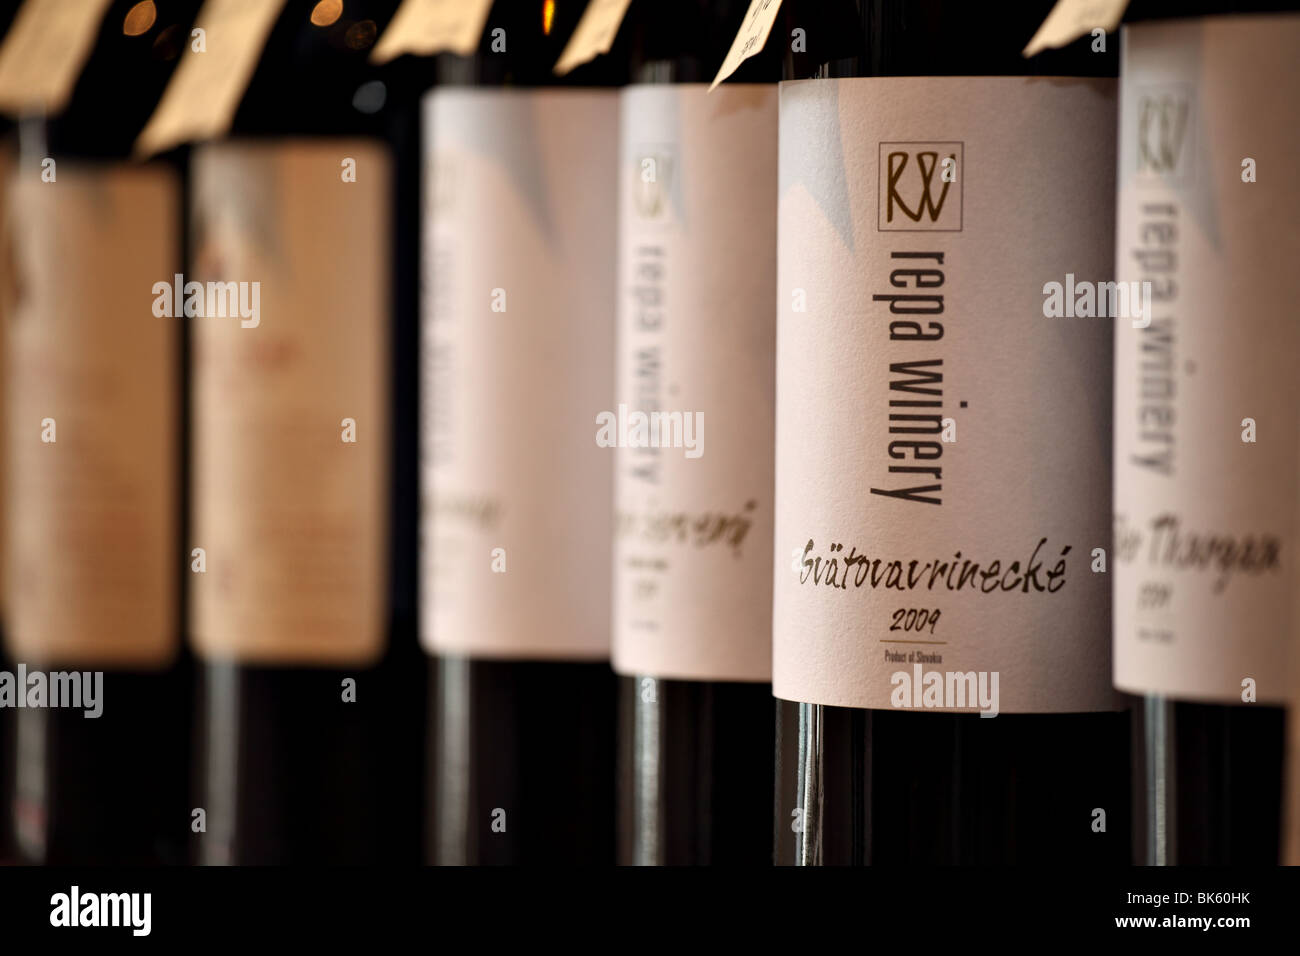 The bottles of  red wine 'Svatovavrinecke' from 'Repa Winery' in the wine shop 'Vinoteka Soldan'. Stock Photo